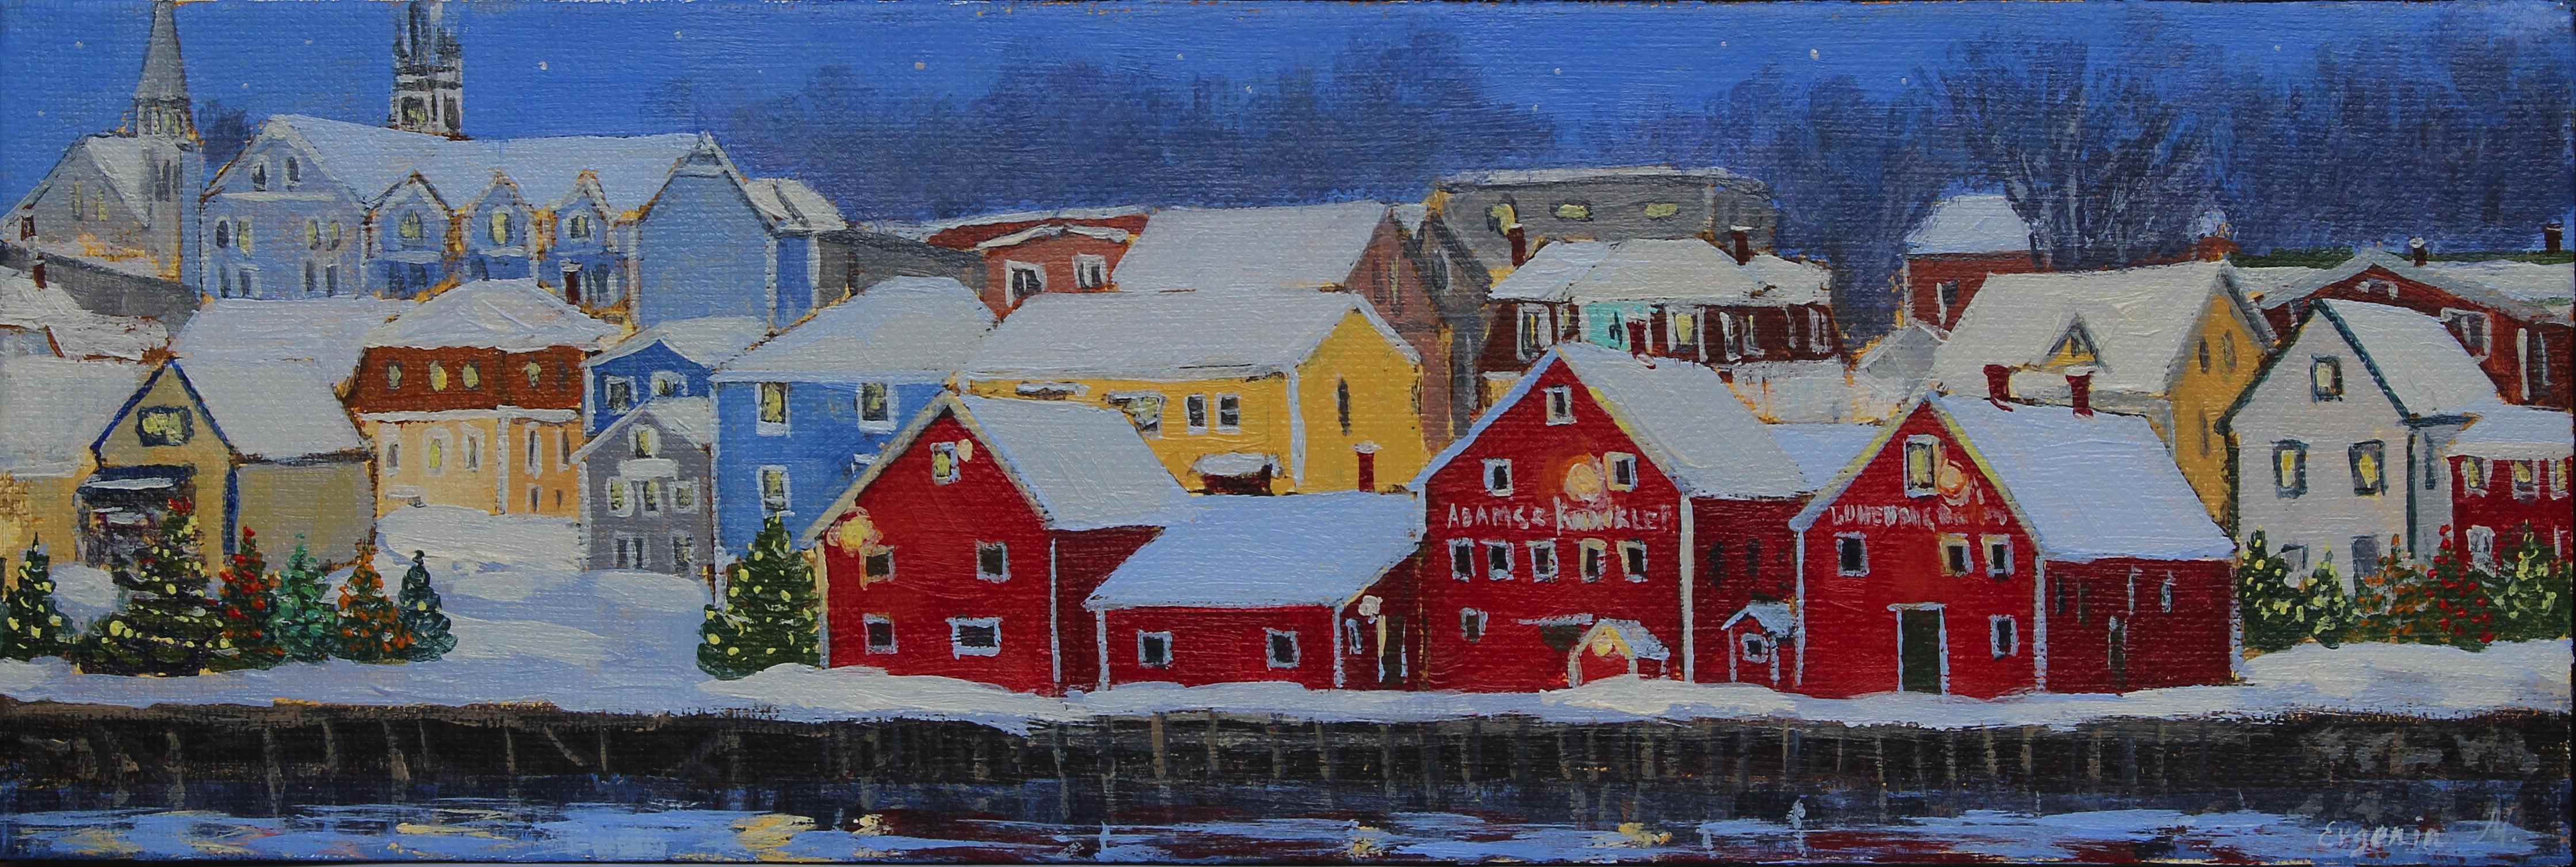 acrylic painting of Lunenburg town on Christmas Eve